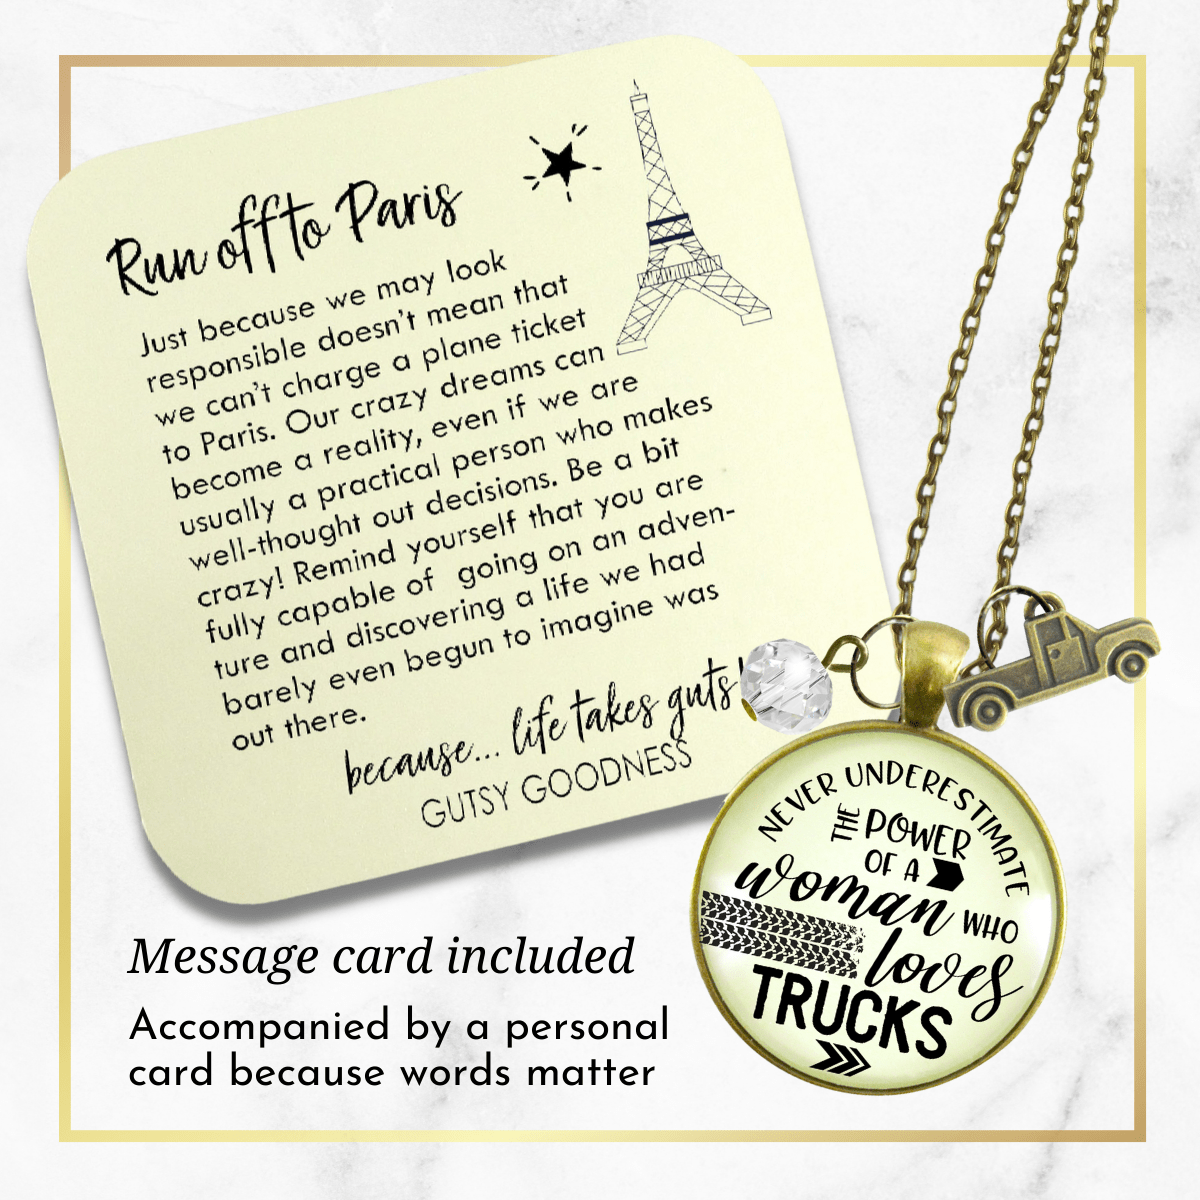 Gutsy Goodness Paris Necklace I May France Themed Jewelry Quote Eiffel Tower Charm Gift - Gutsy Goodness;Paris Necklace I May France Themed Jewelry Quote Eiffel Tower Charm Gift - Gutsy Goodness Handmade Jewelry Gifts